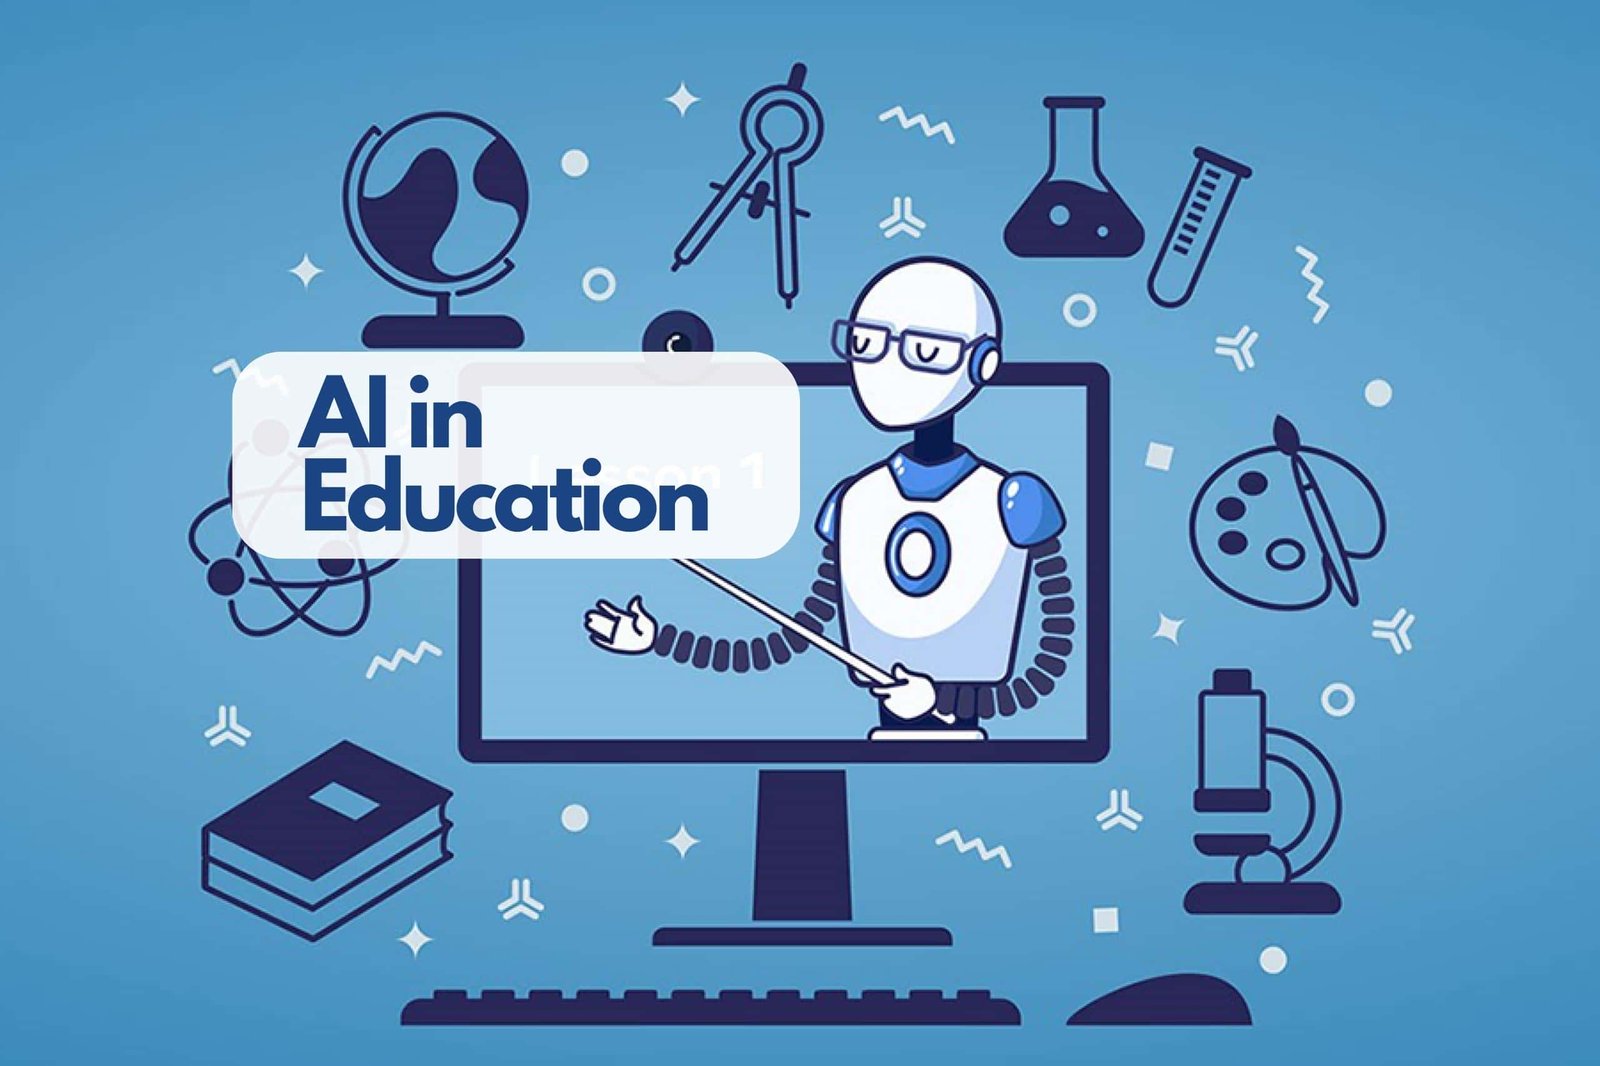 artificial intelligence in education policy